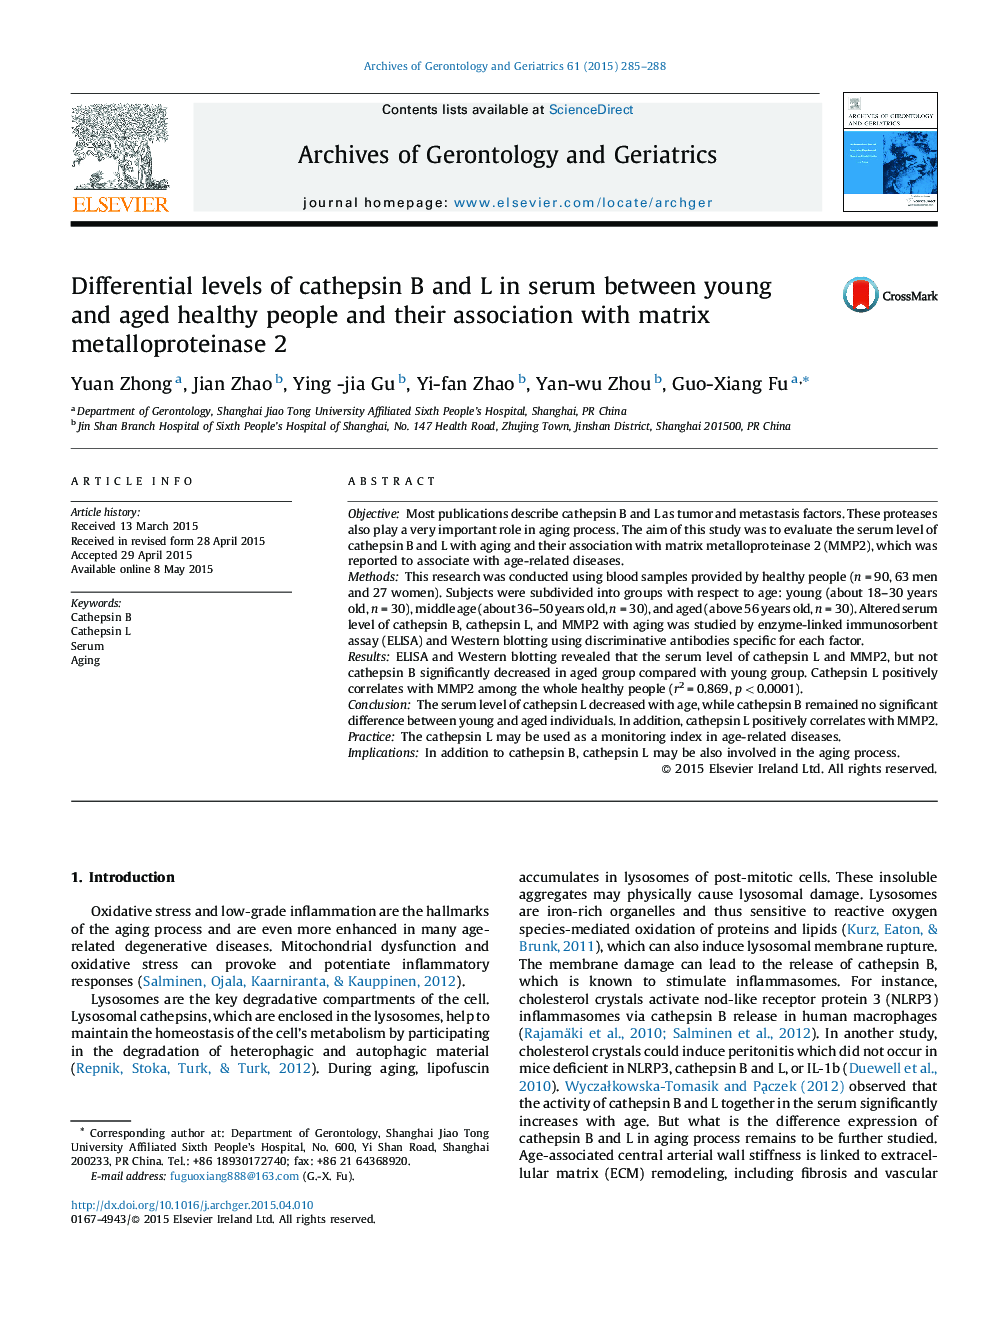 Differential levels of cathepsin B and L in serum between young and aged healthy people and their association with matrix metalloproteinase 2